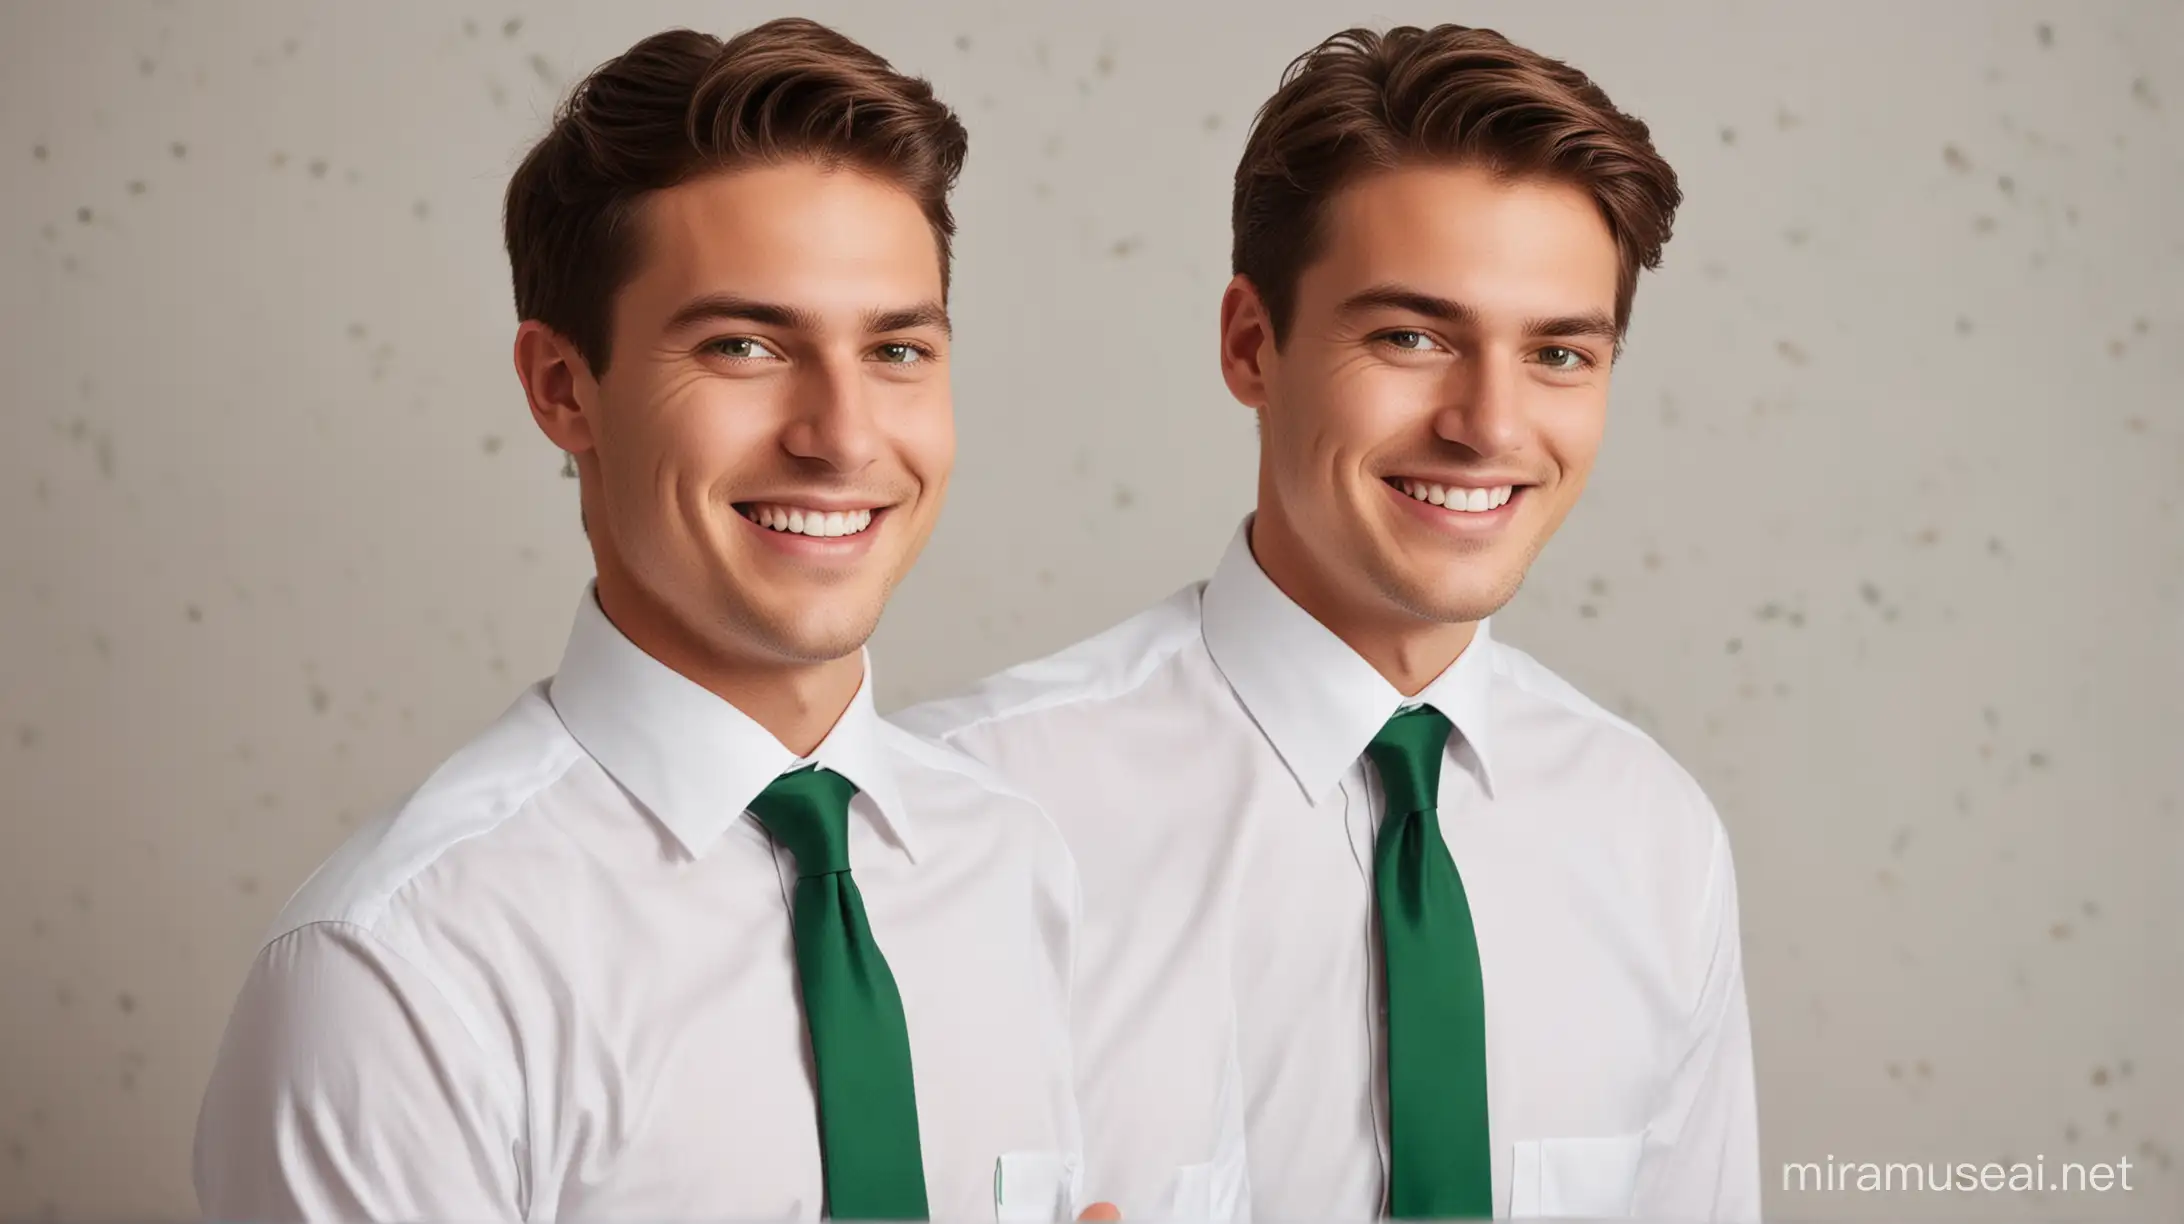 two young men wearing crisp white dress shirts and green ties, one stood behind the other giving a shoulder massage, smiling lovingly at each other